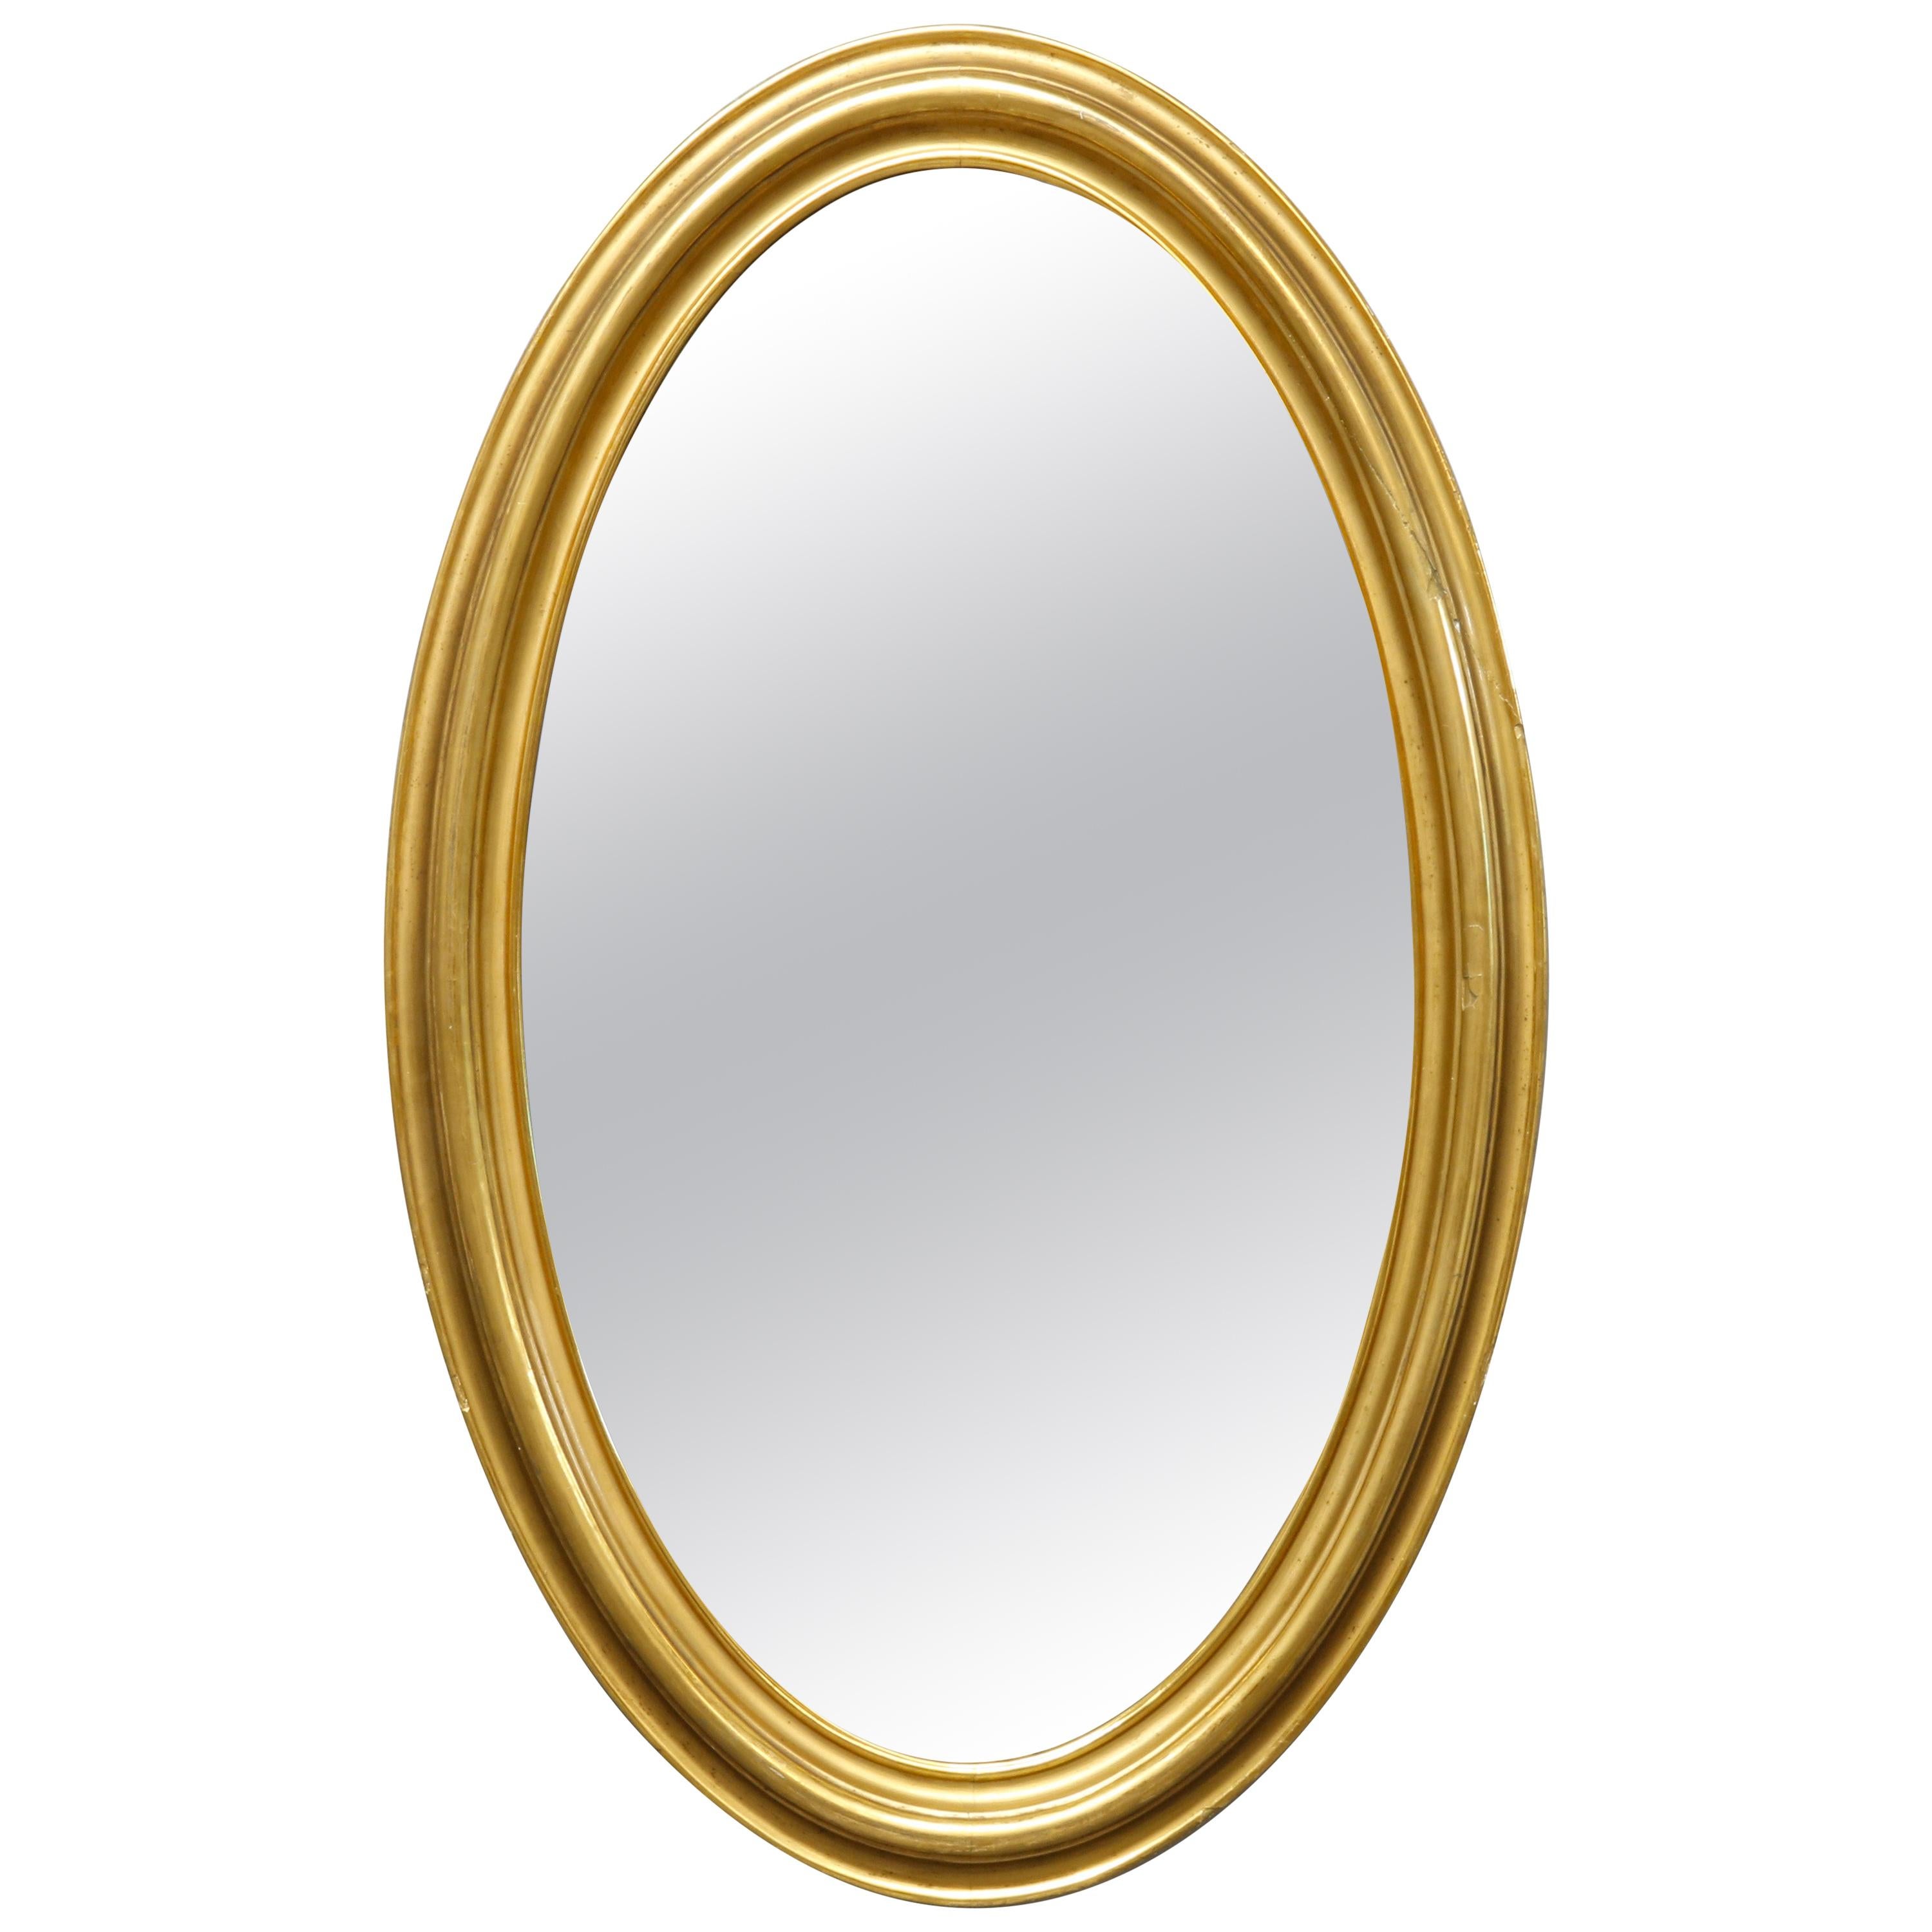 Antique Early Large Oval Giltwood Wall Mirror, circa 1830